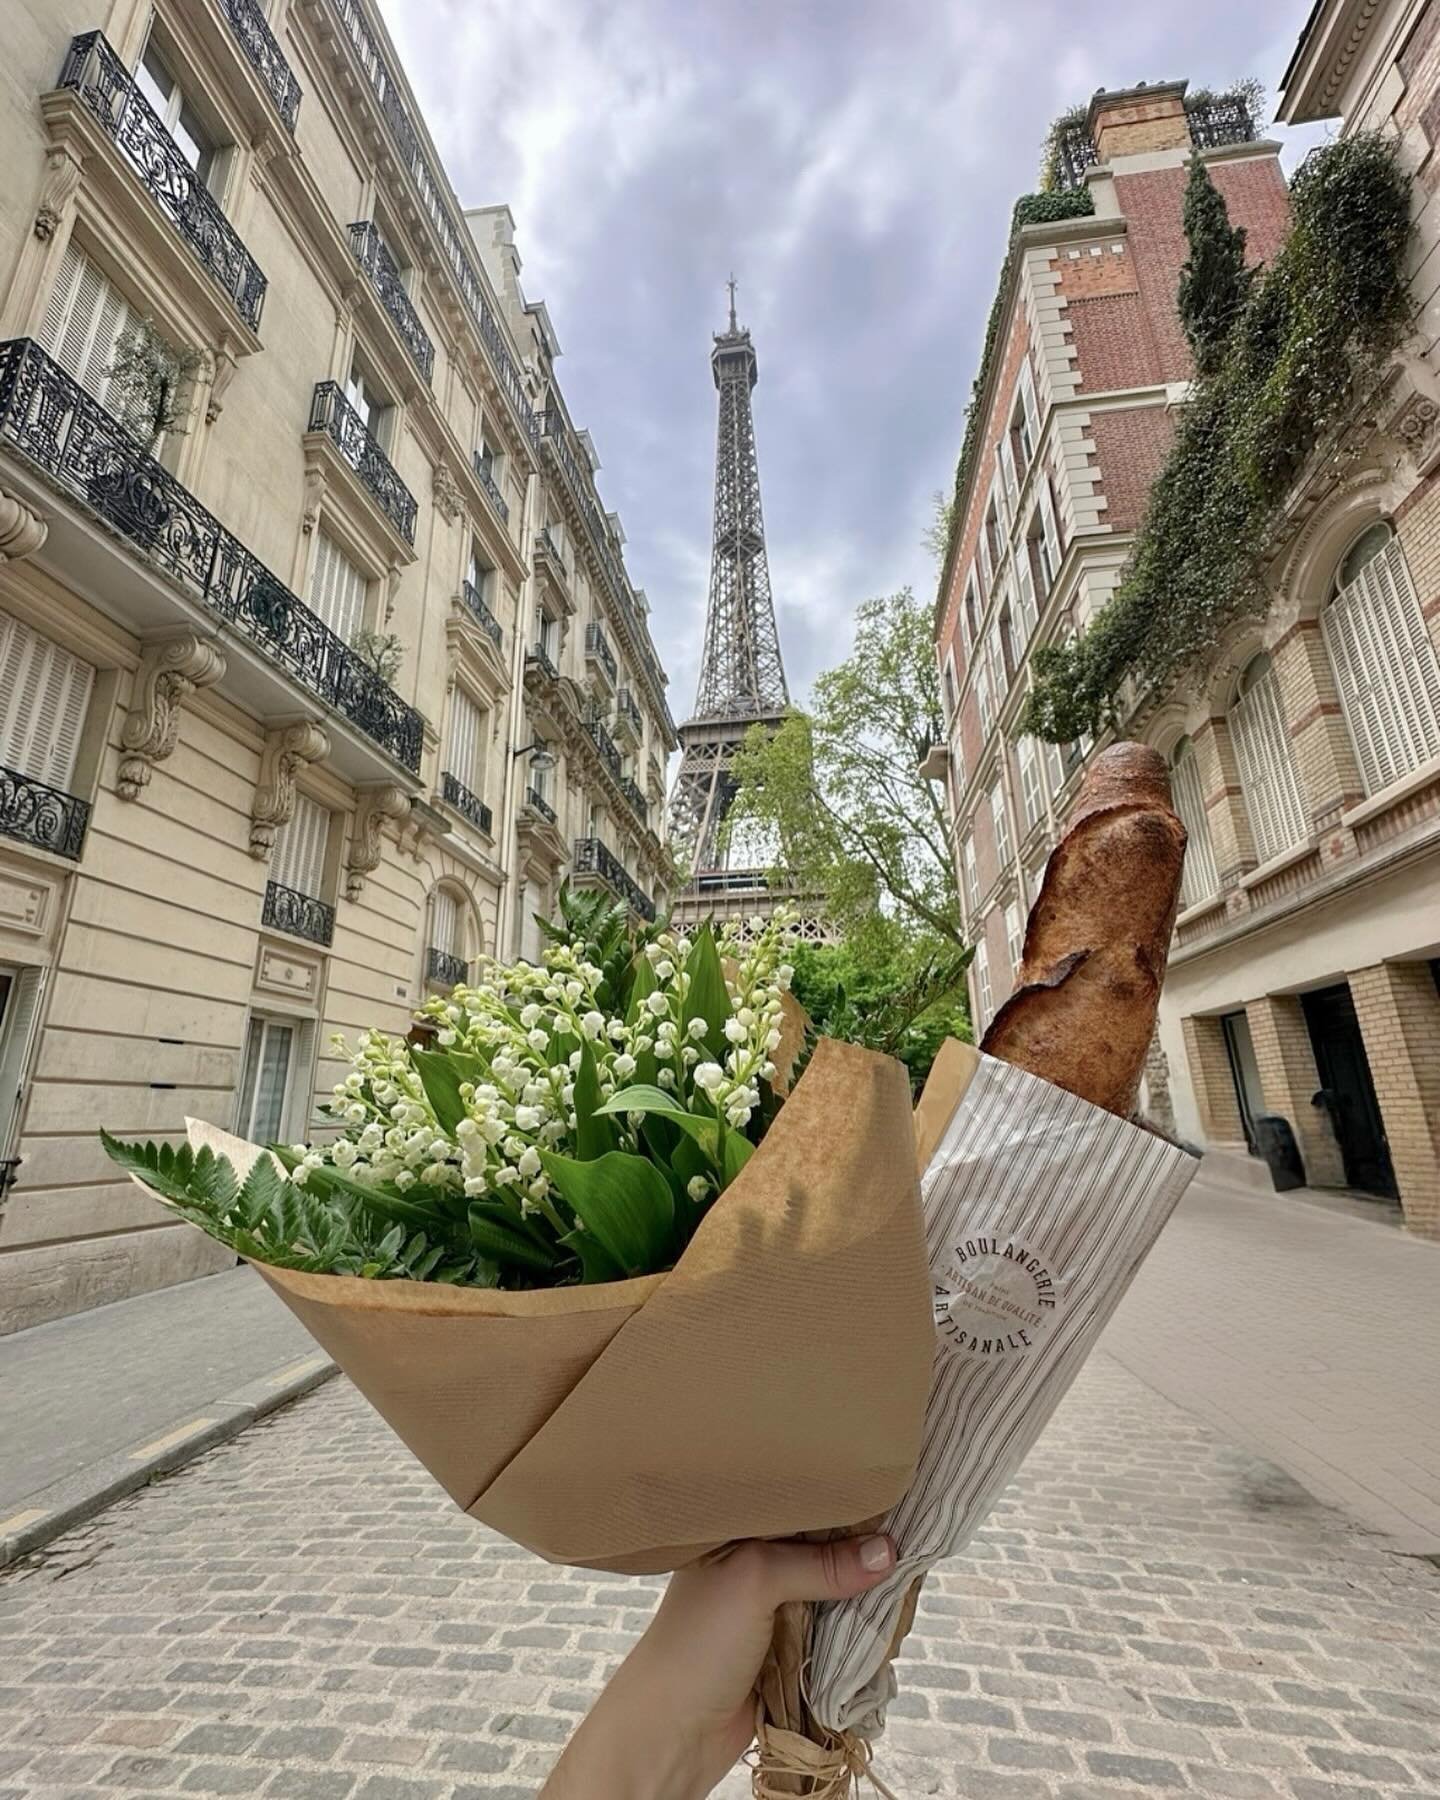 Happy May 1st! 🌱 In France, there&rsquo;s a charming tradition of giving loved ones a bouquet of lily of the valley on May Day, a custom that dates back to the 1500s. These flowers symbolize good luck. Today, I was in awe by the sight of hundreds of